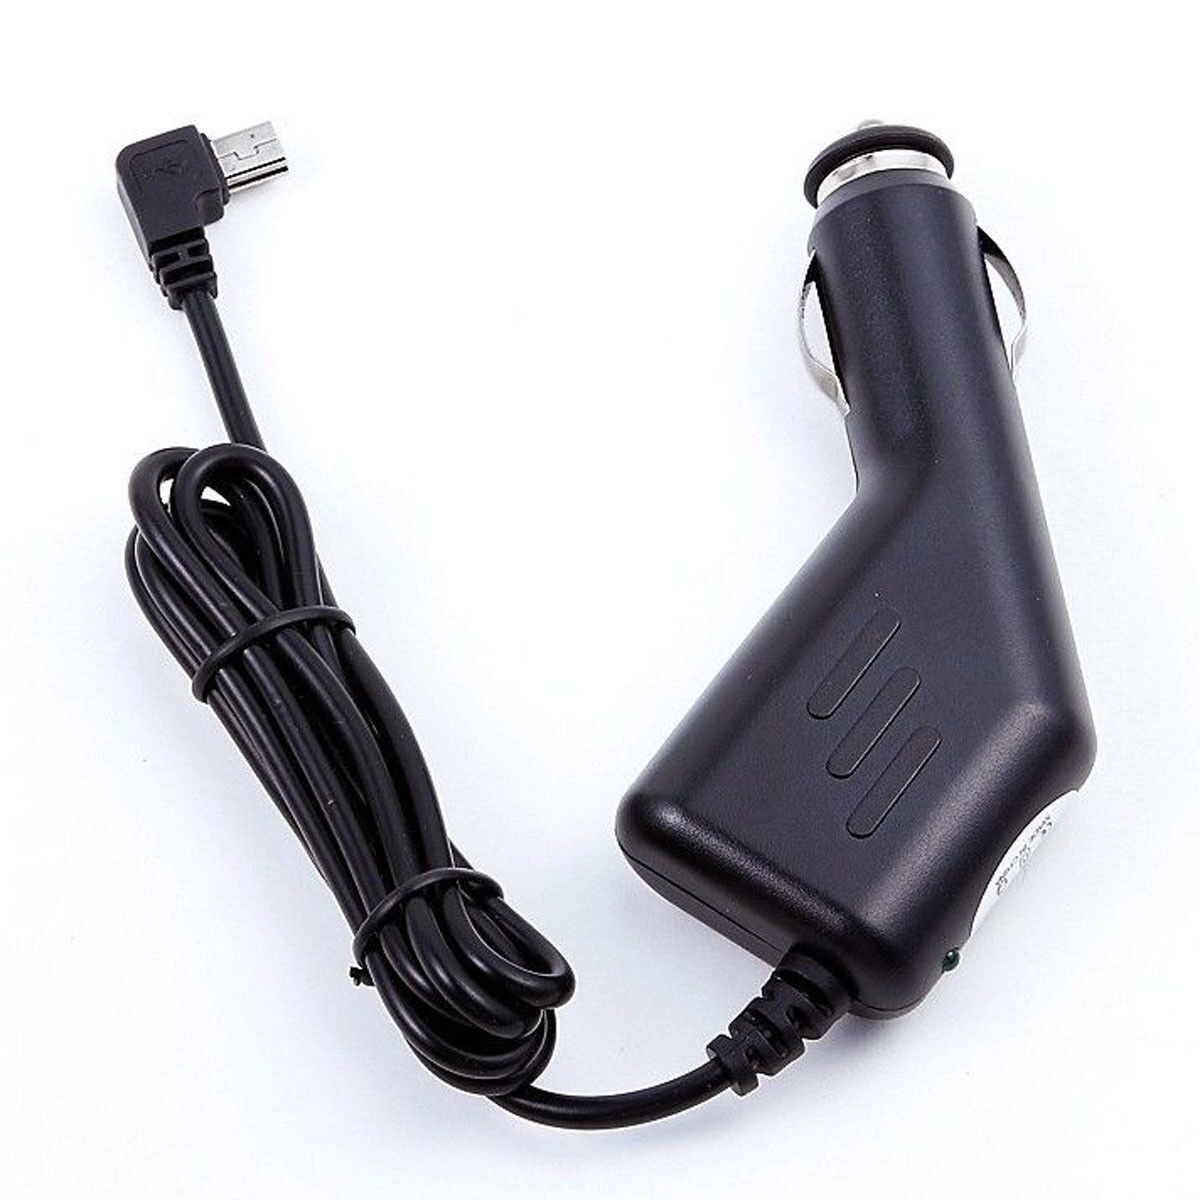 Car Charger Auto Dc Power Adapter Cord For Garmin Gps Montana 650 Lm 650T 600 T - $21.99